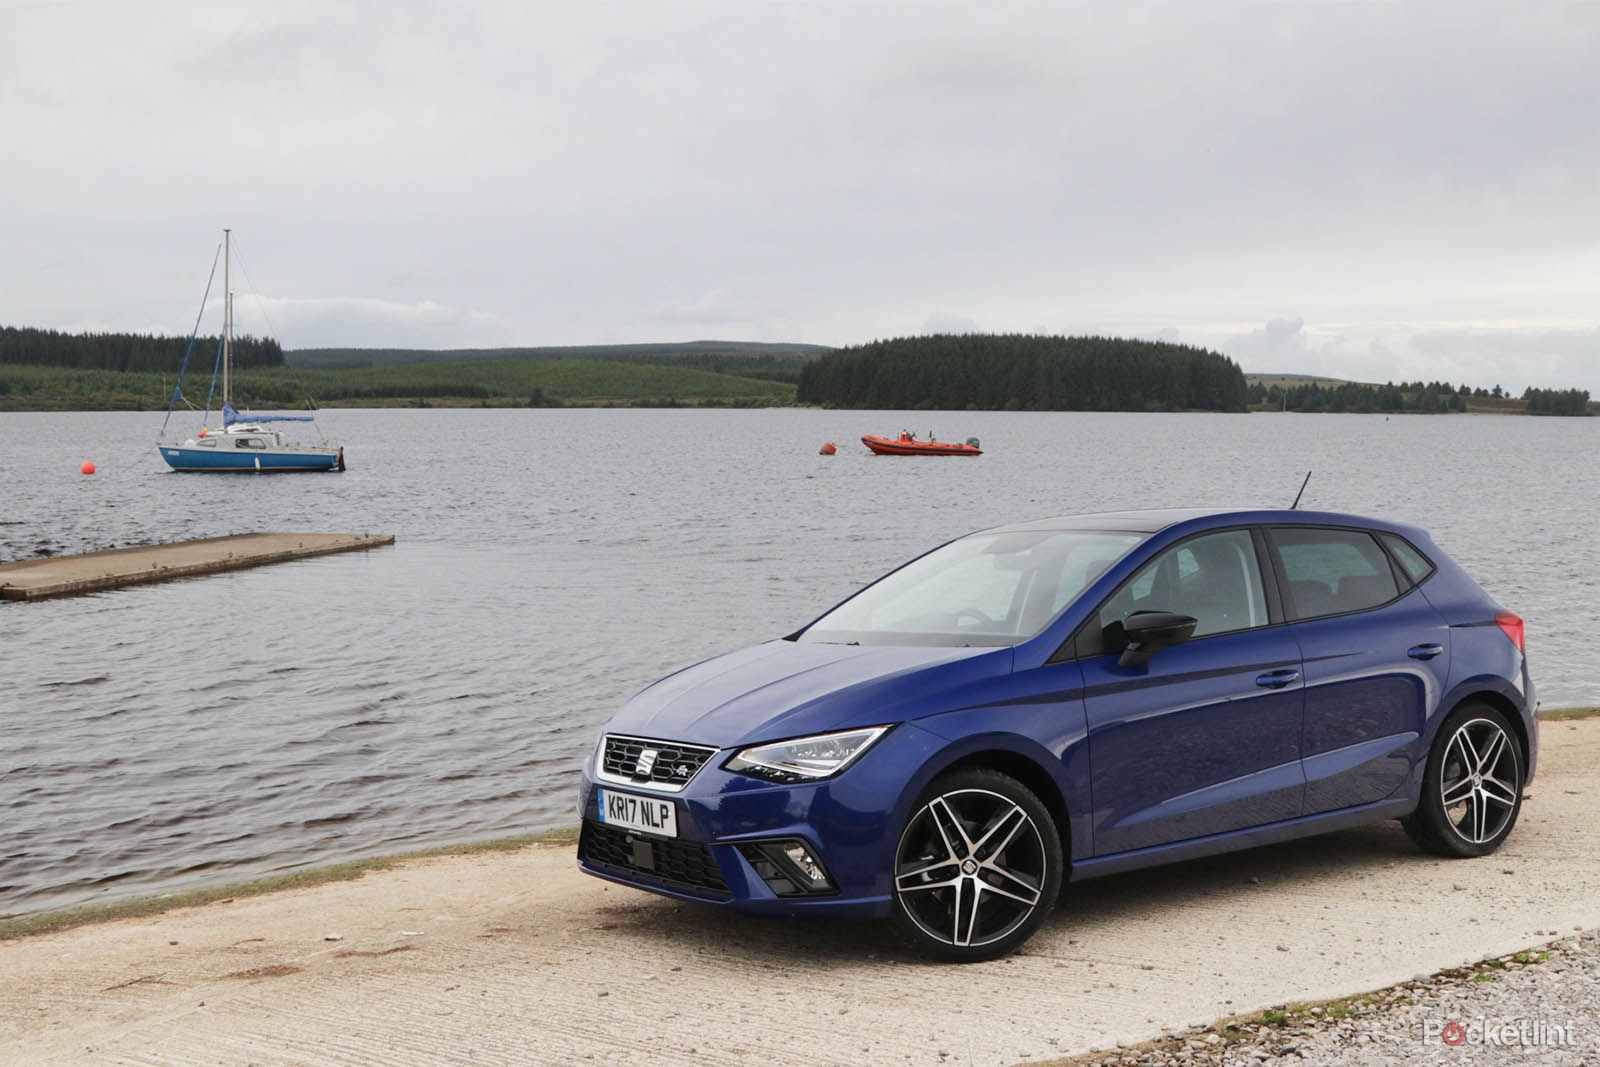 Seat Ibiza review: A class-leading drive that's fun for all the family